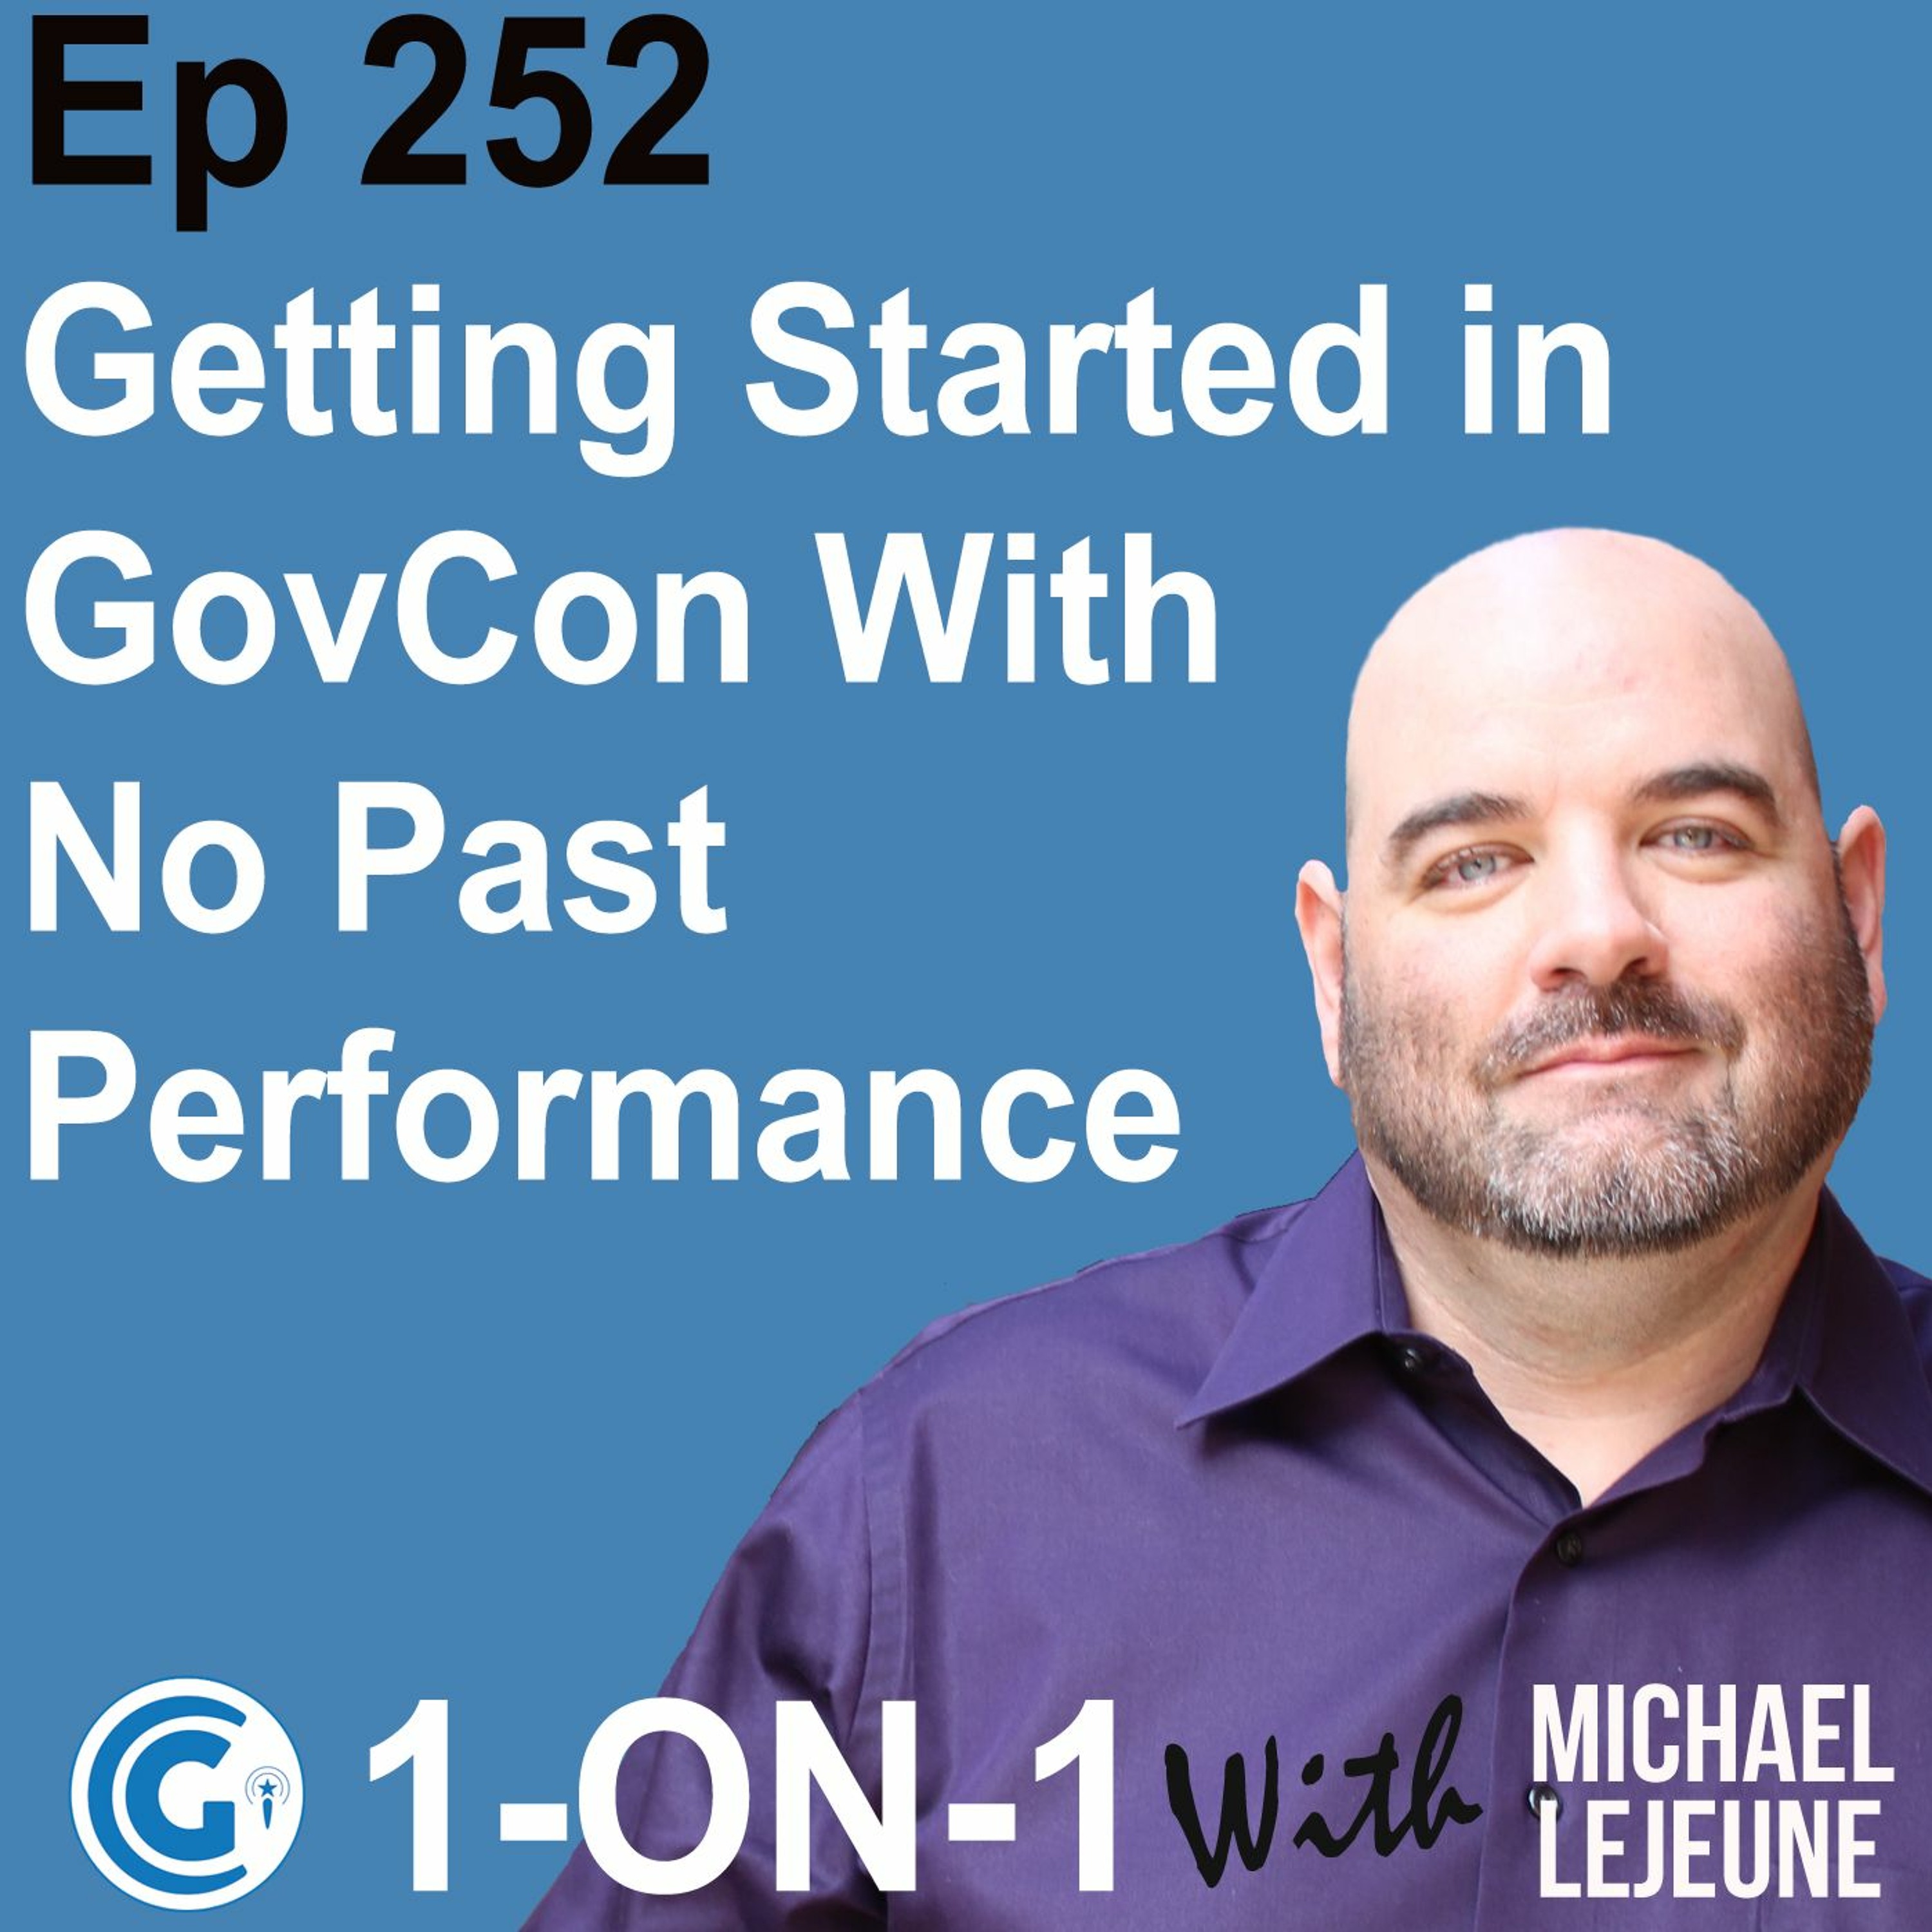 Ep 252: How to Get Started in GovCon with Little or No Past Performance